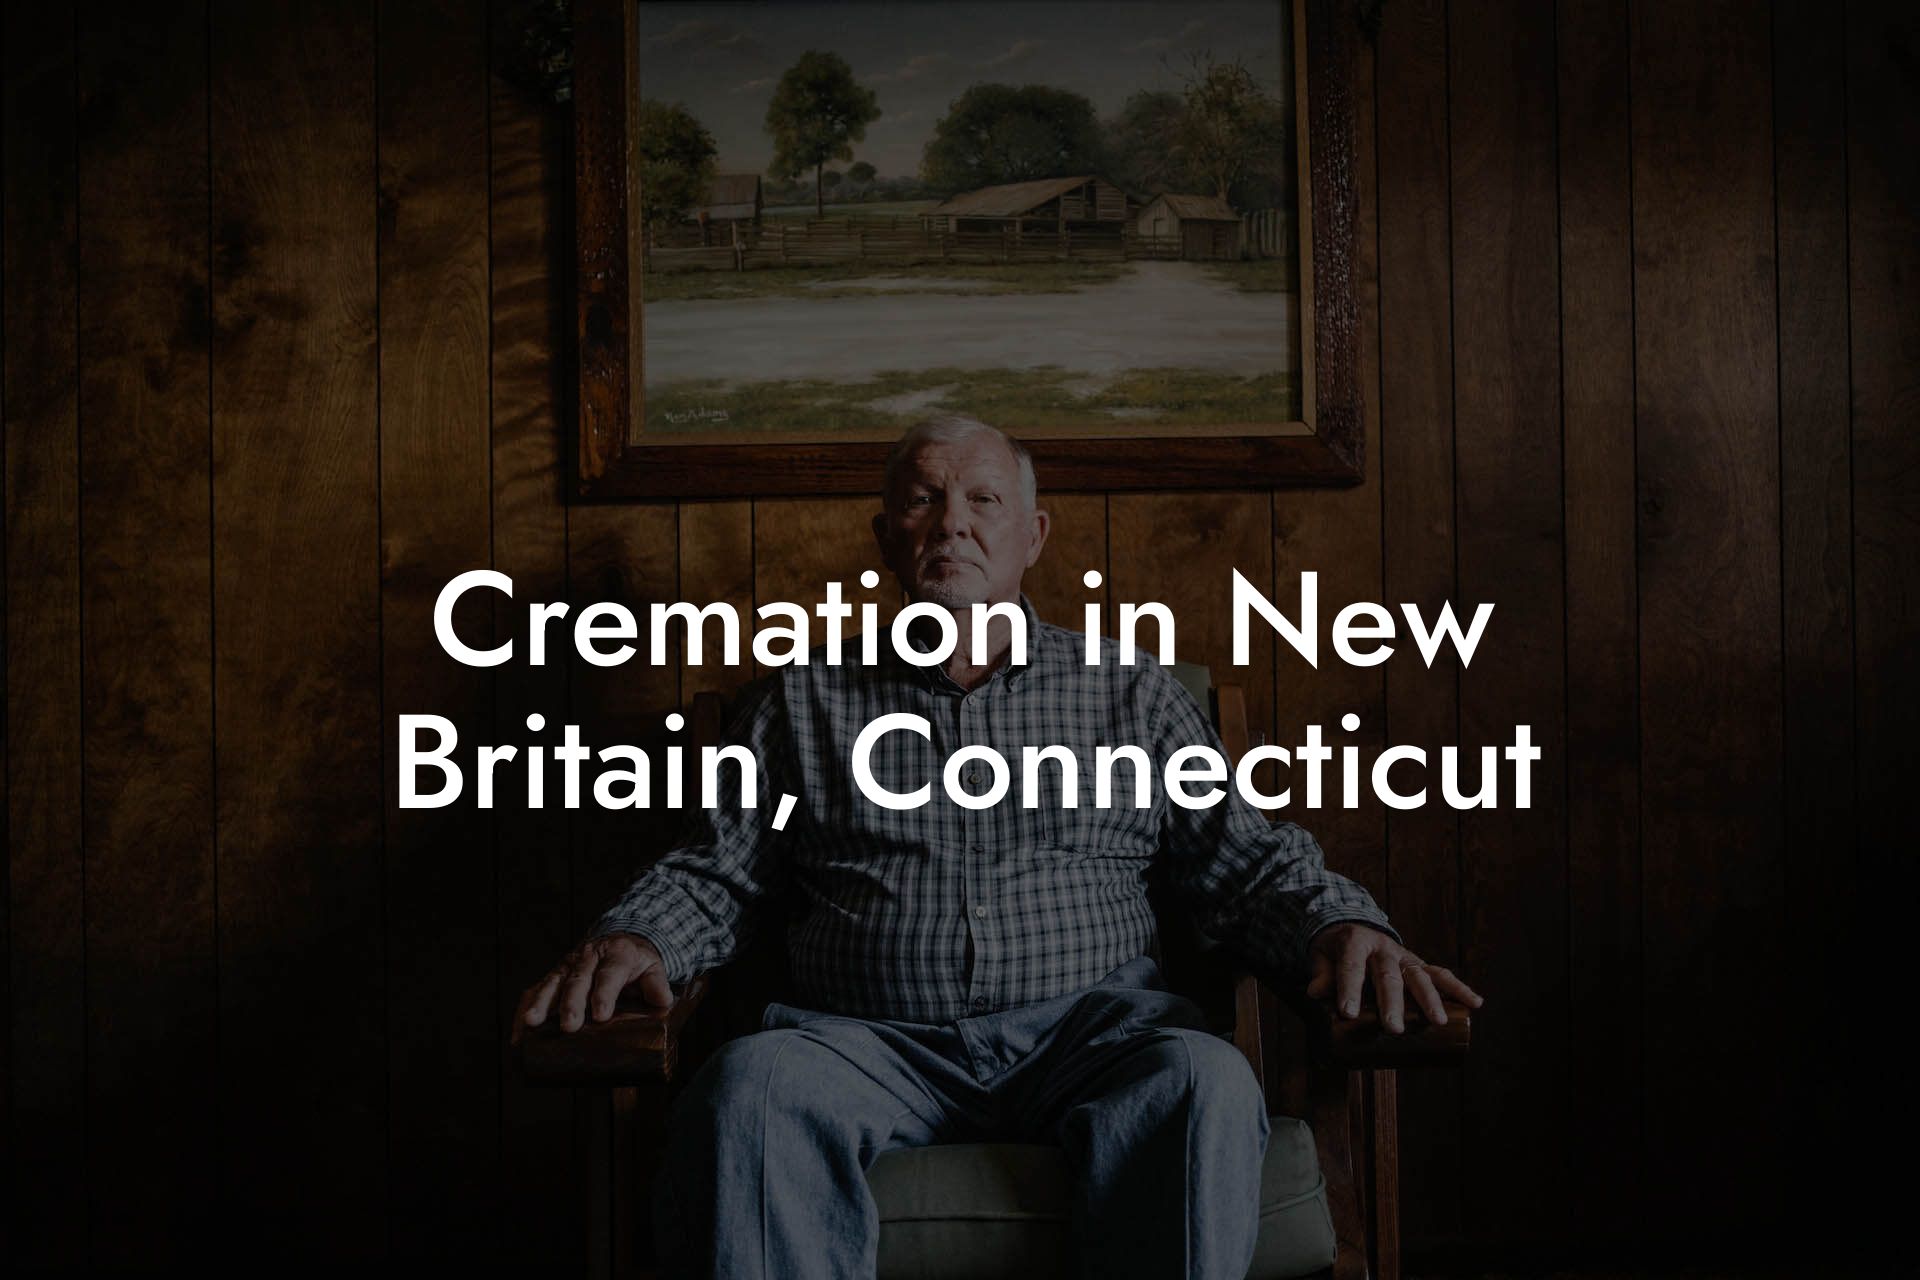 Cremation in New Britain, Connecticut